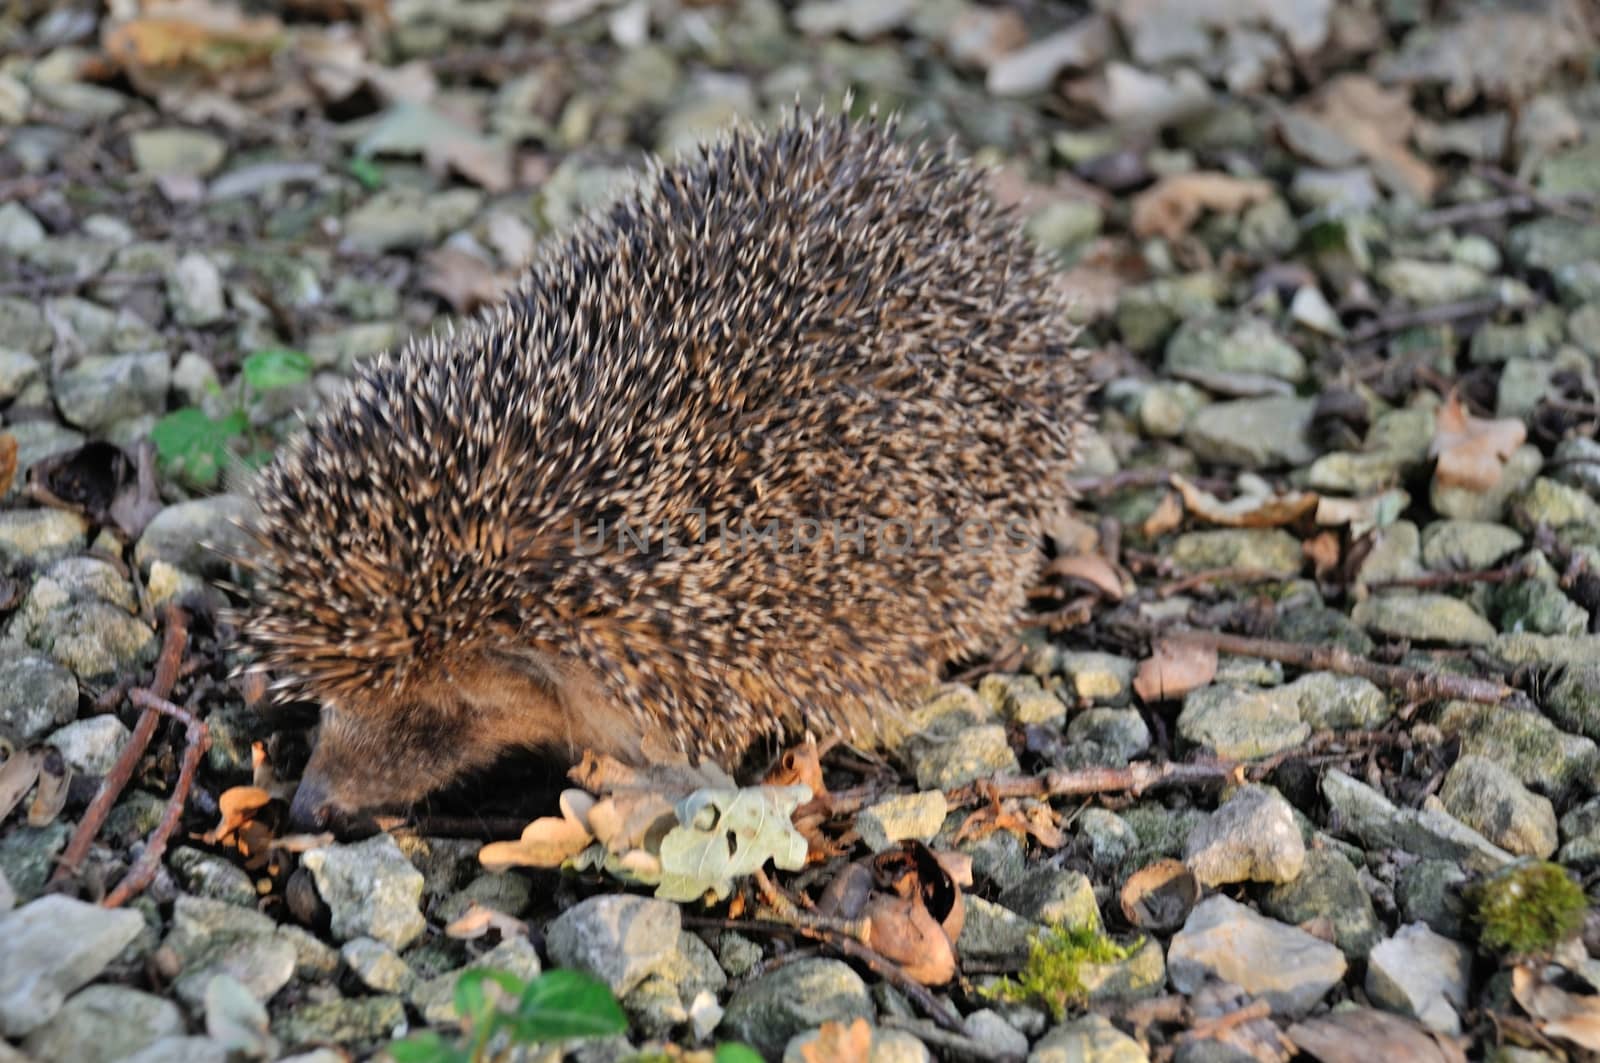 Hedgehog in the driveway of a garden by BZH22